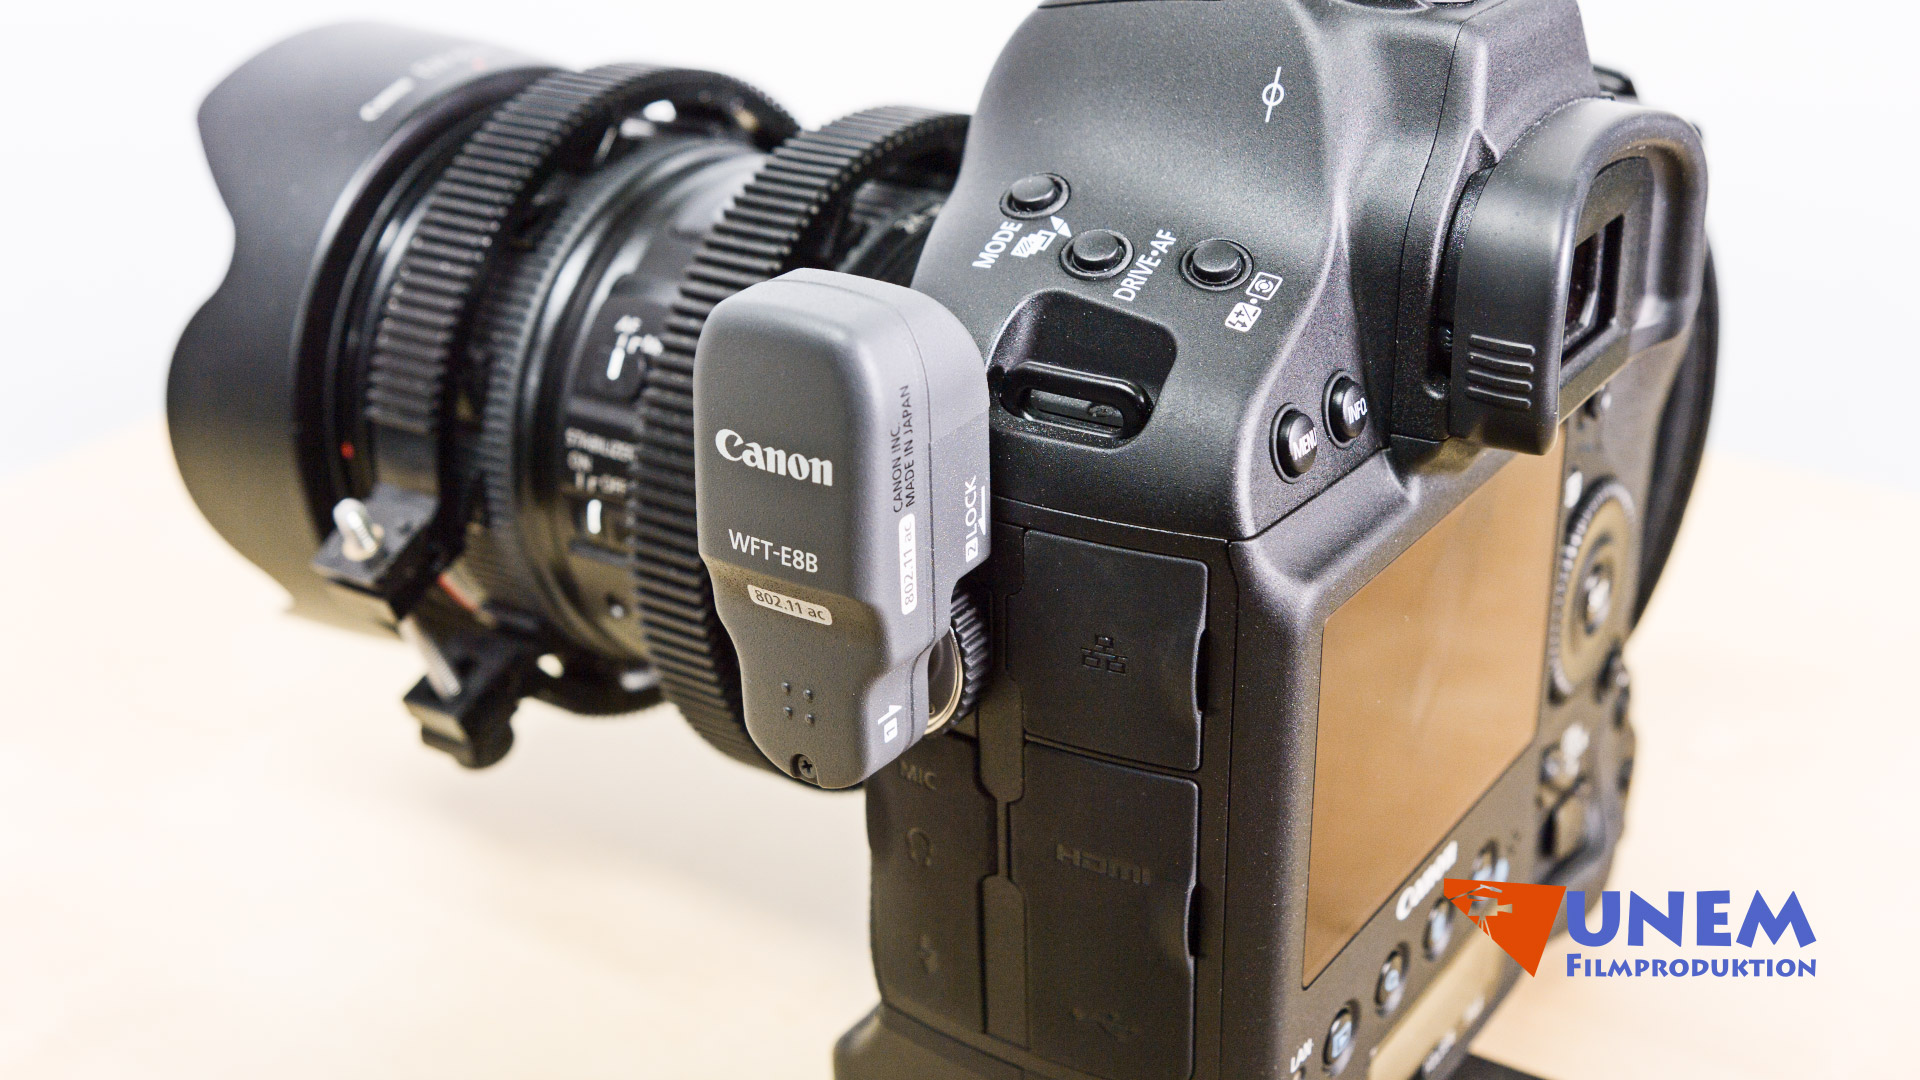 wifi module and connections of the Canon 1D-X Mark II